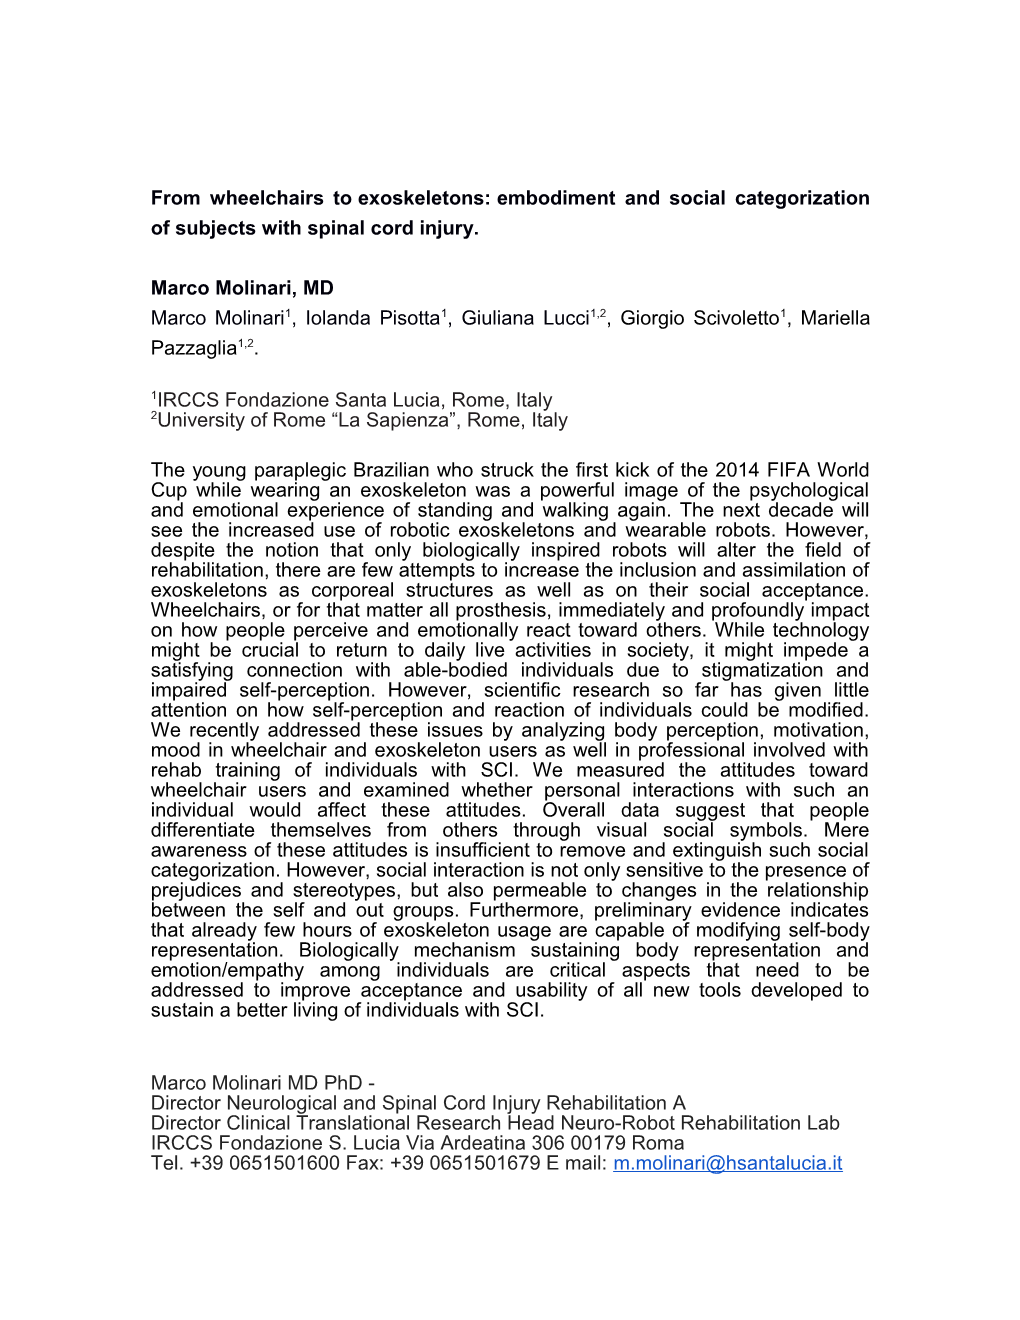 From Wheelchairs Toexoskeletons:Embodiment and Social Categorization of Subjects With